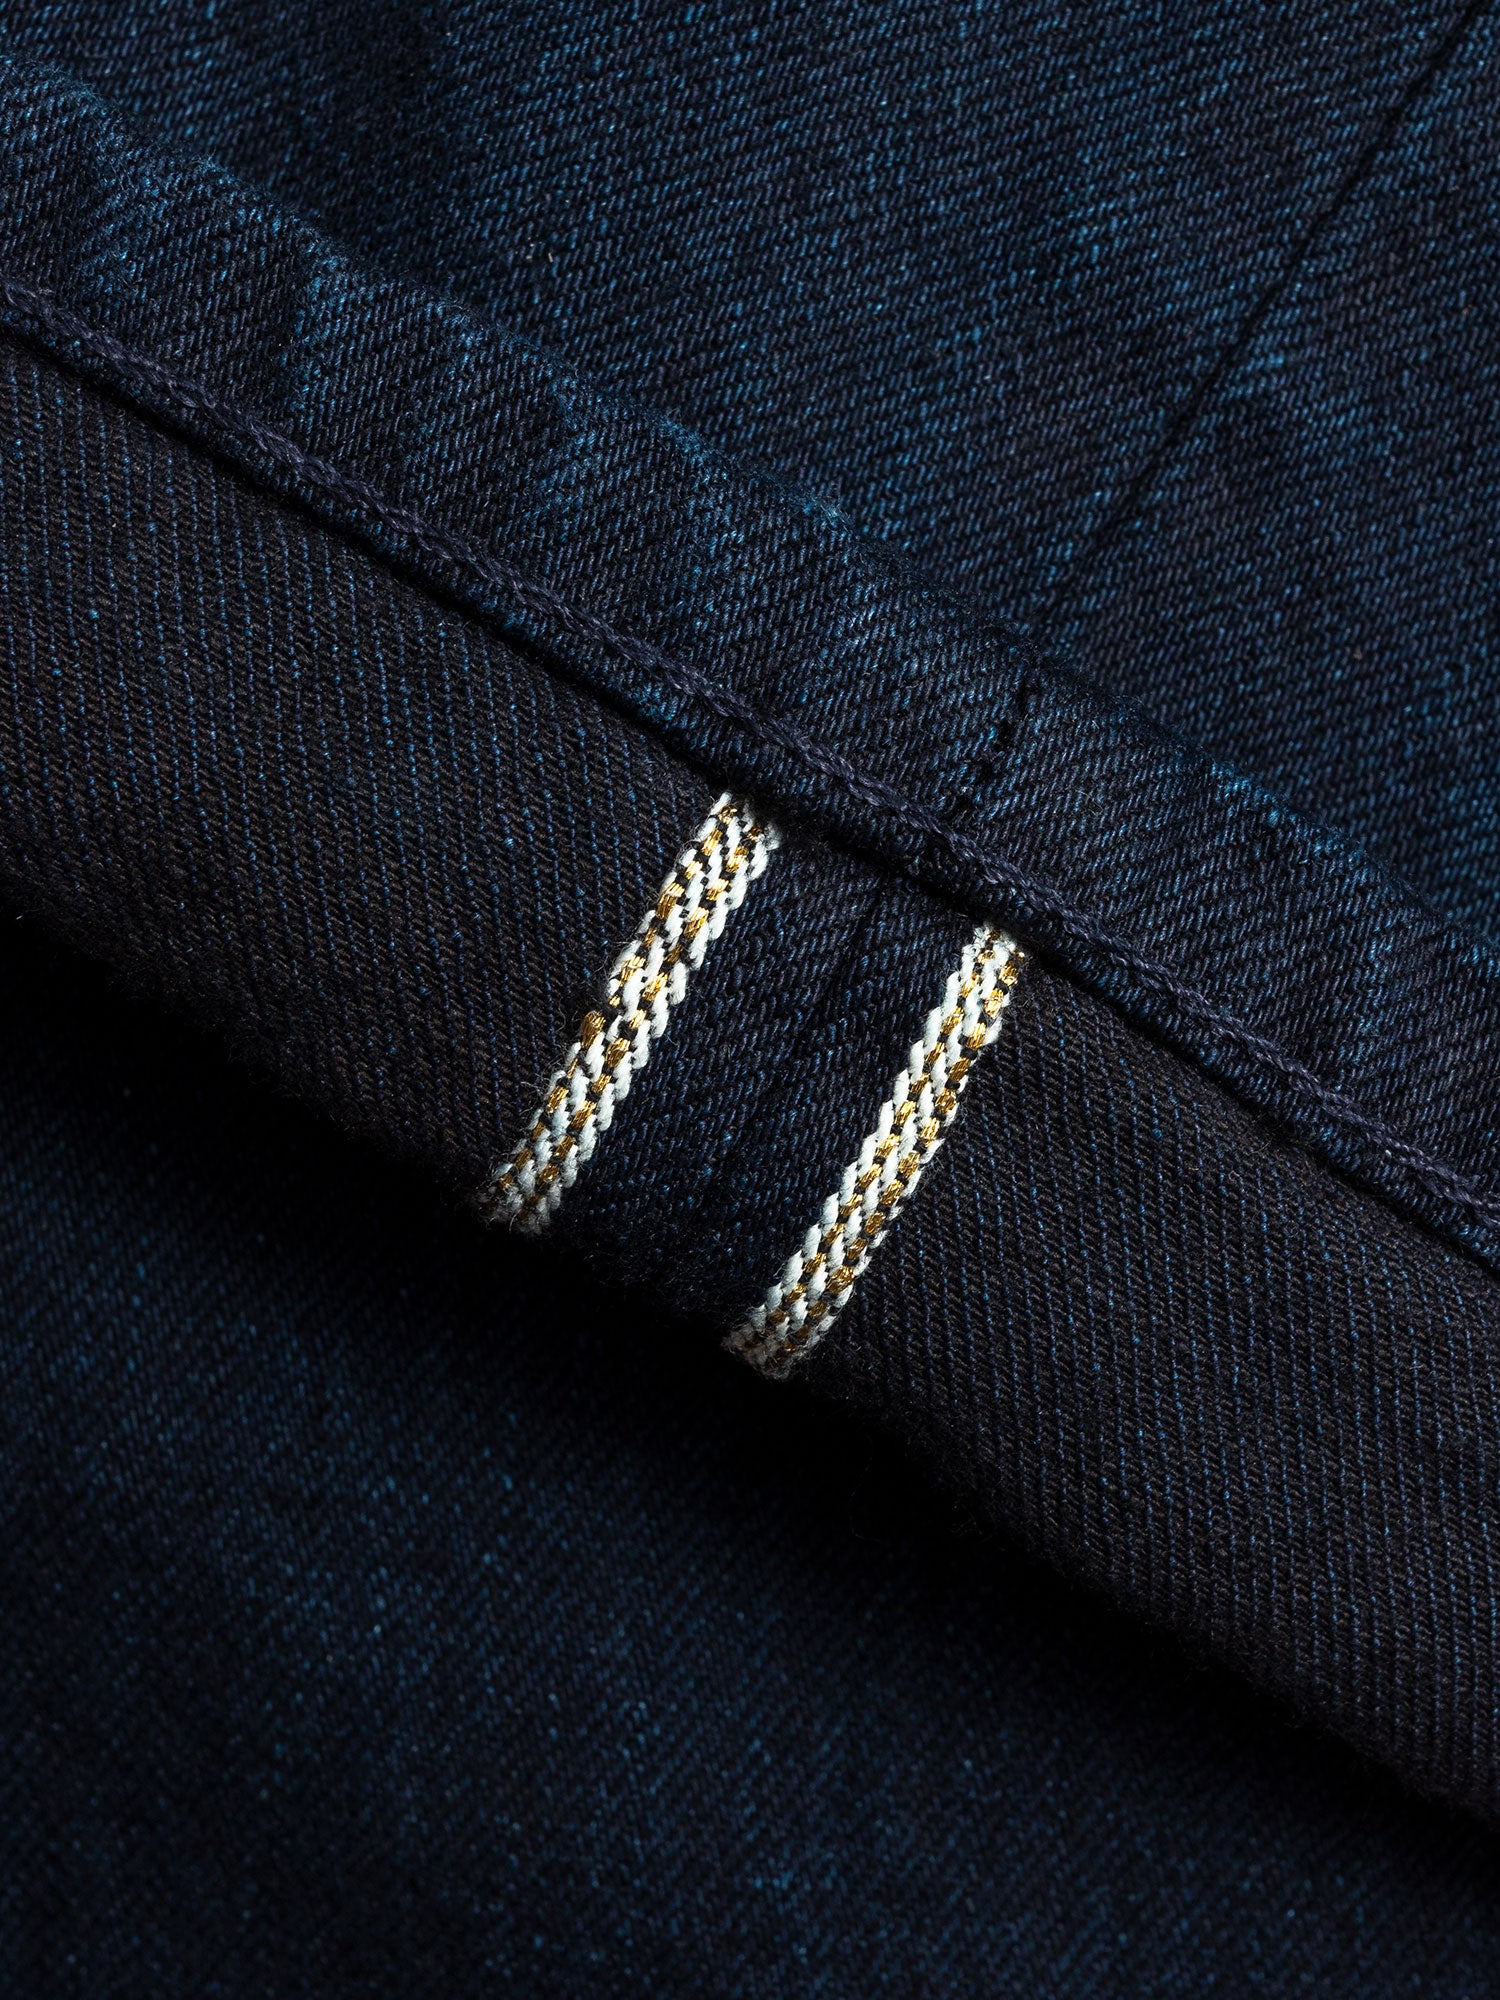 3sixteen x Blue Owl "Gold Rush" Shadow Selvedge Denim - Classic Tapered Fit